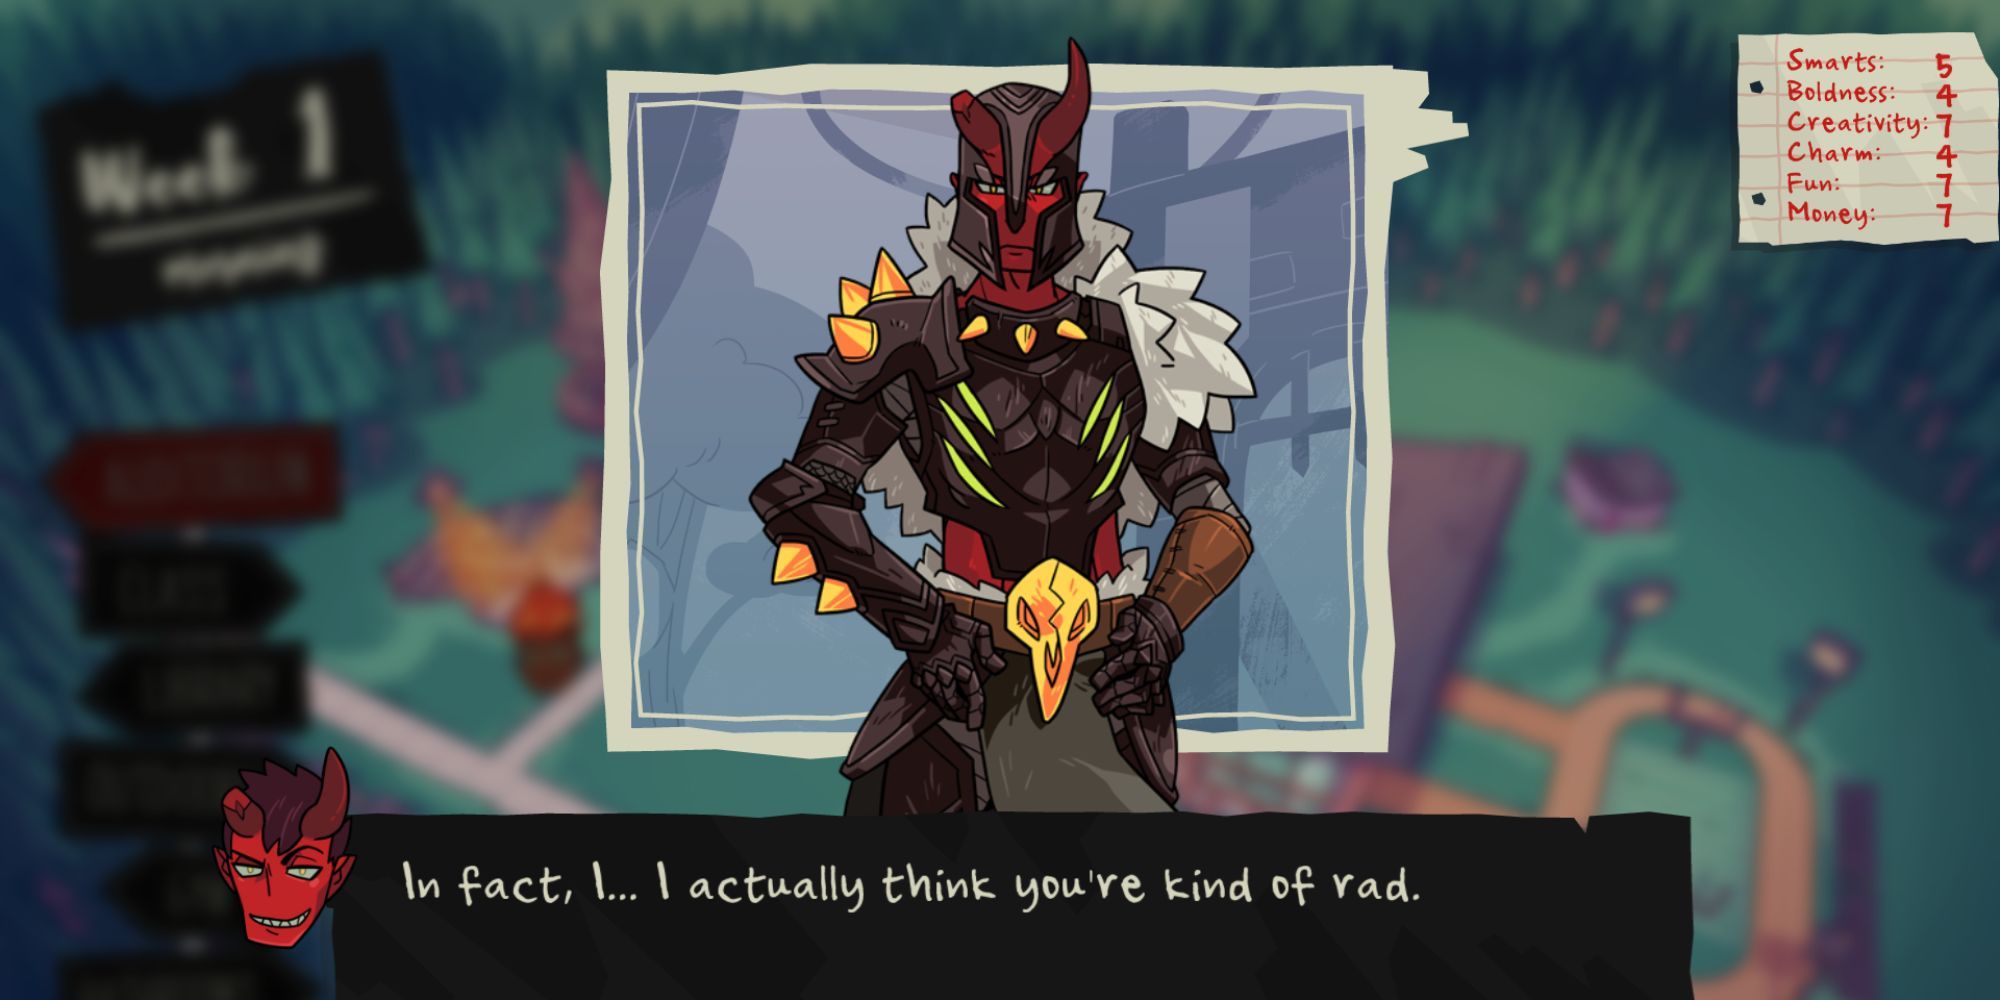 Damien, clad in armor, tells the player that they're rad